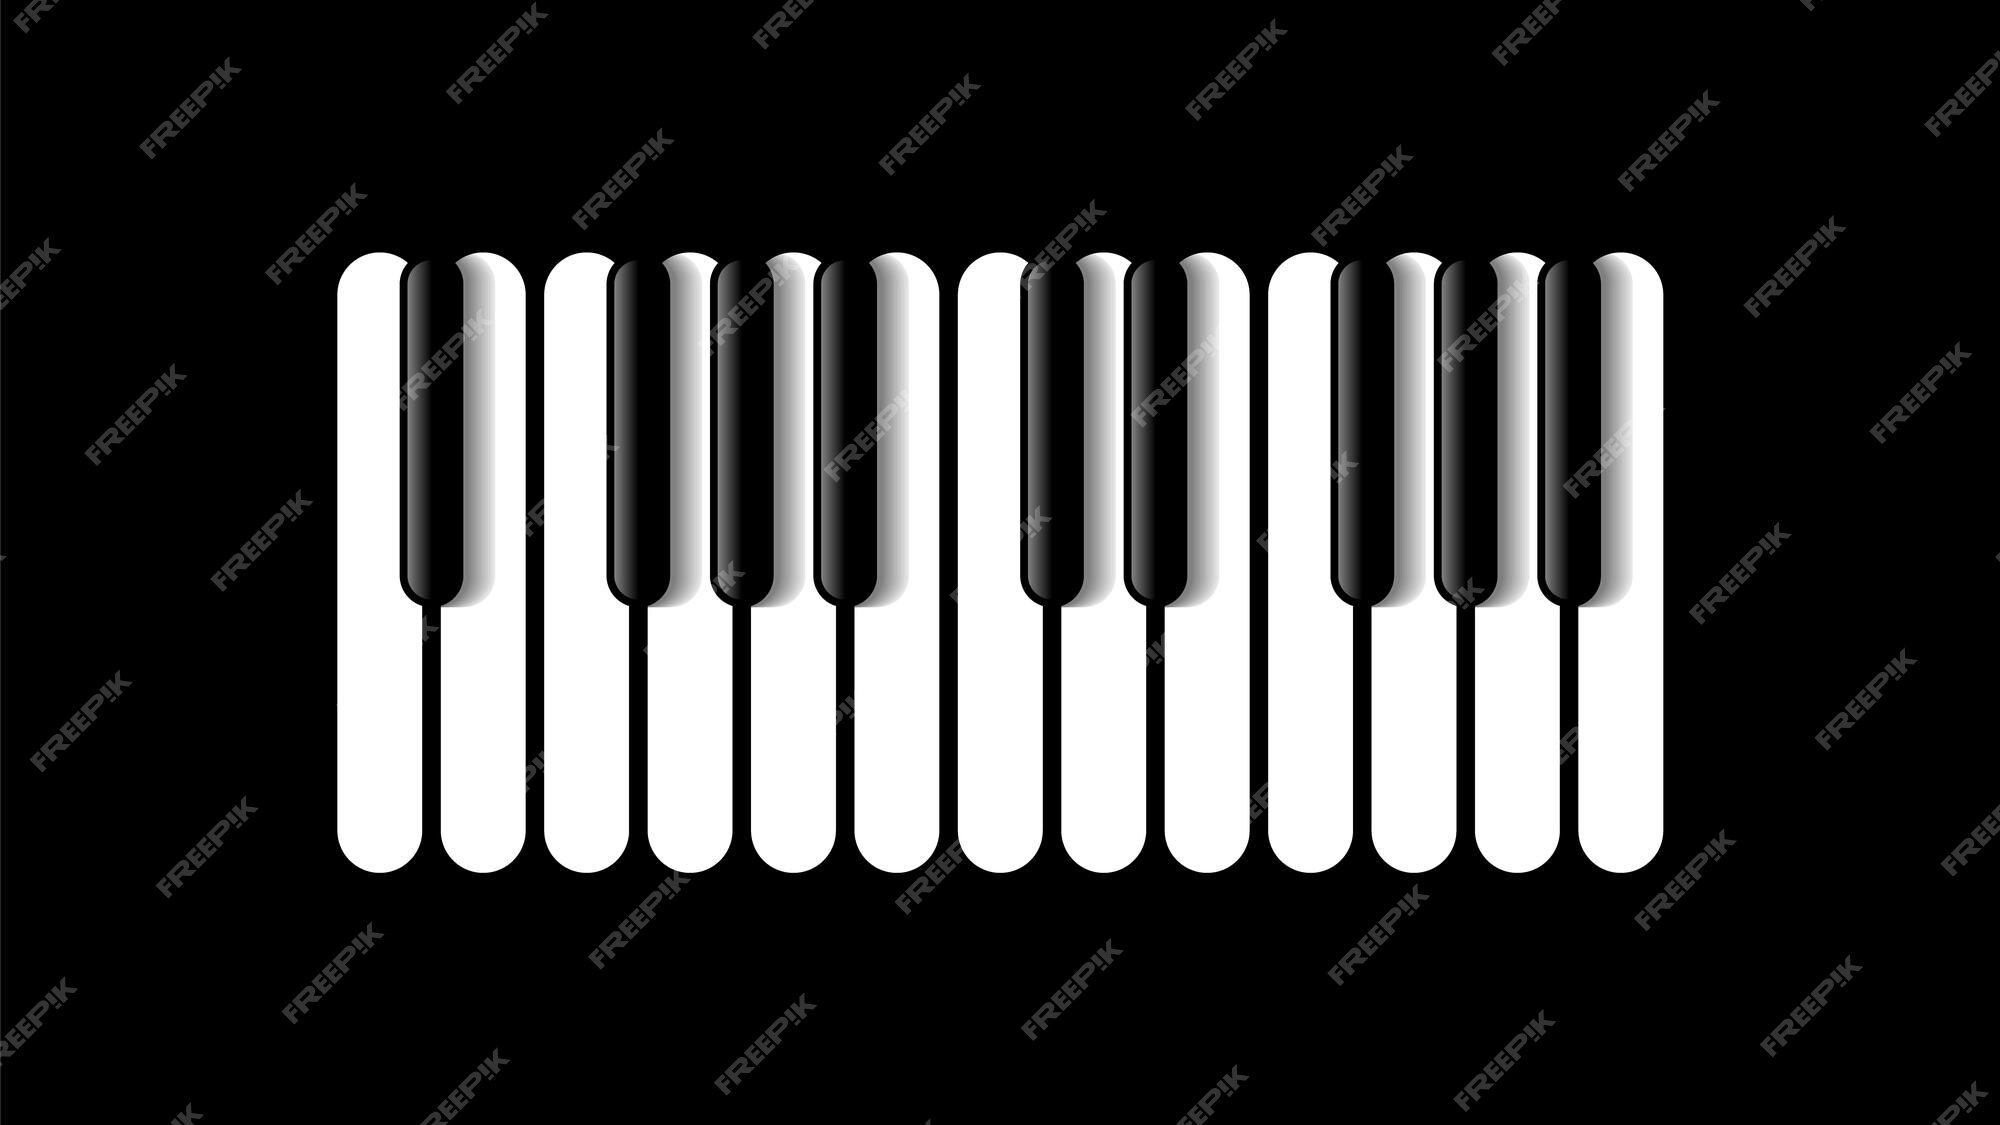 Premium Vector | Abstract piano keys music keyboard instrument song melody  vector design style